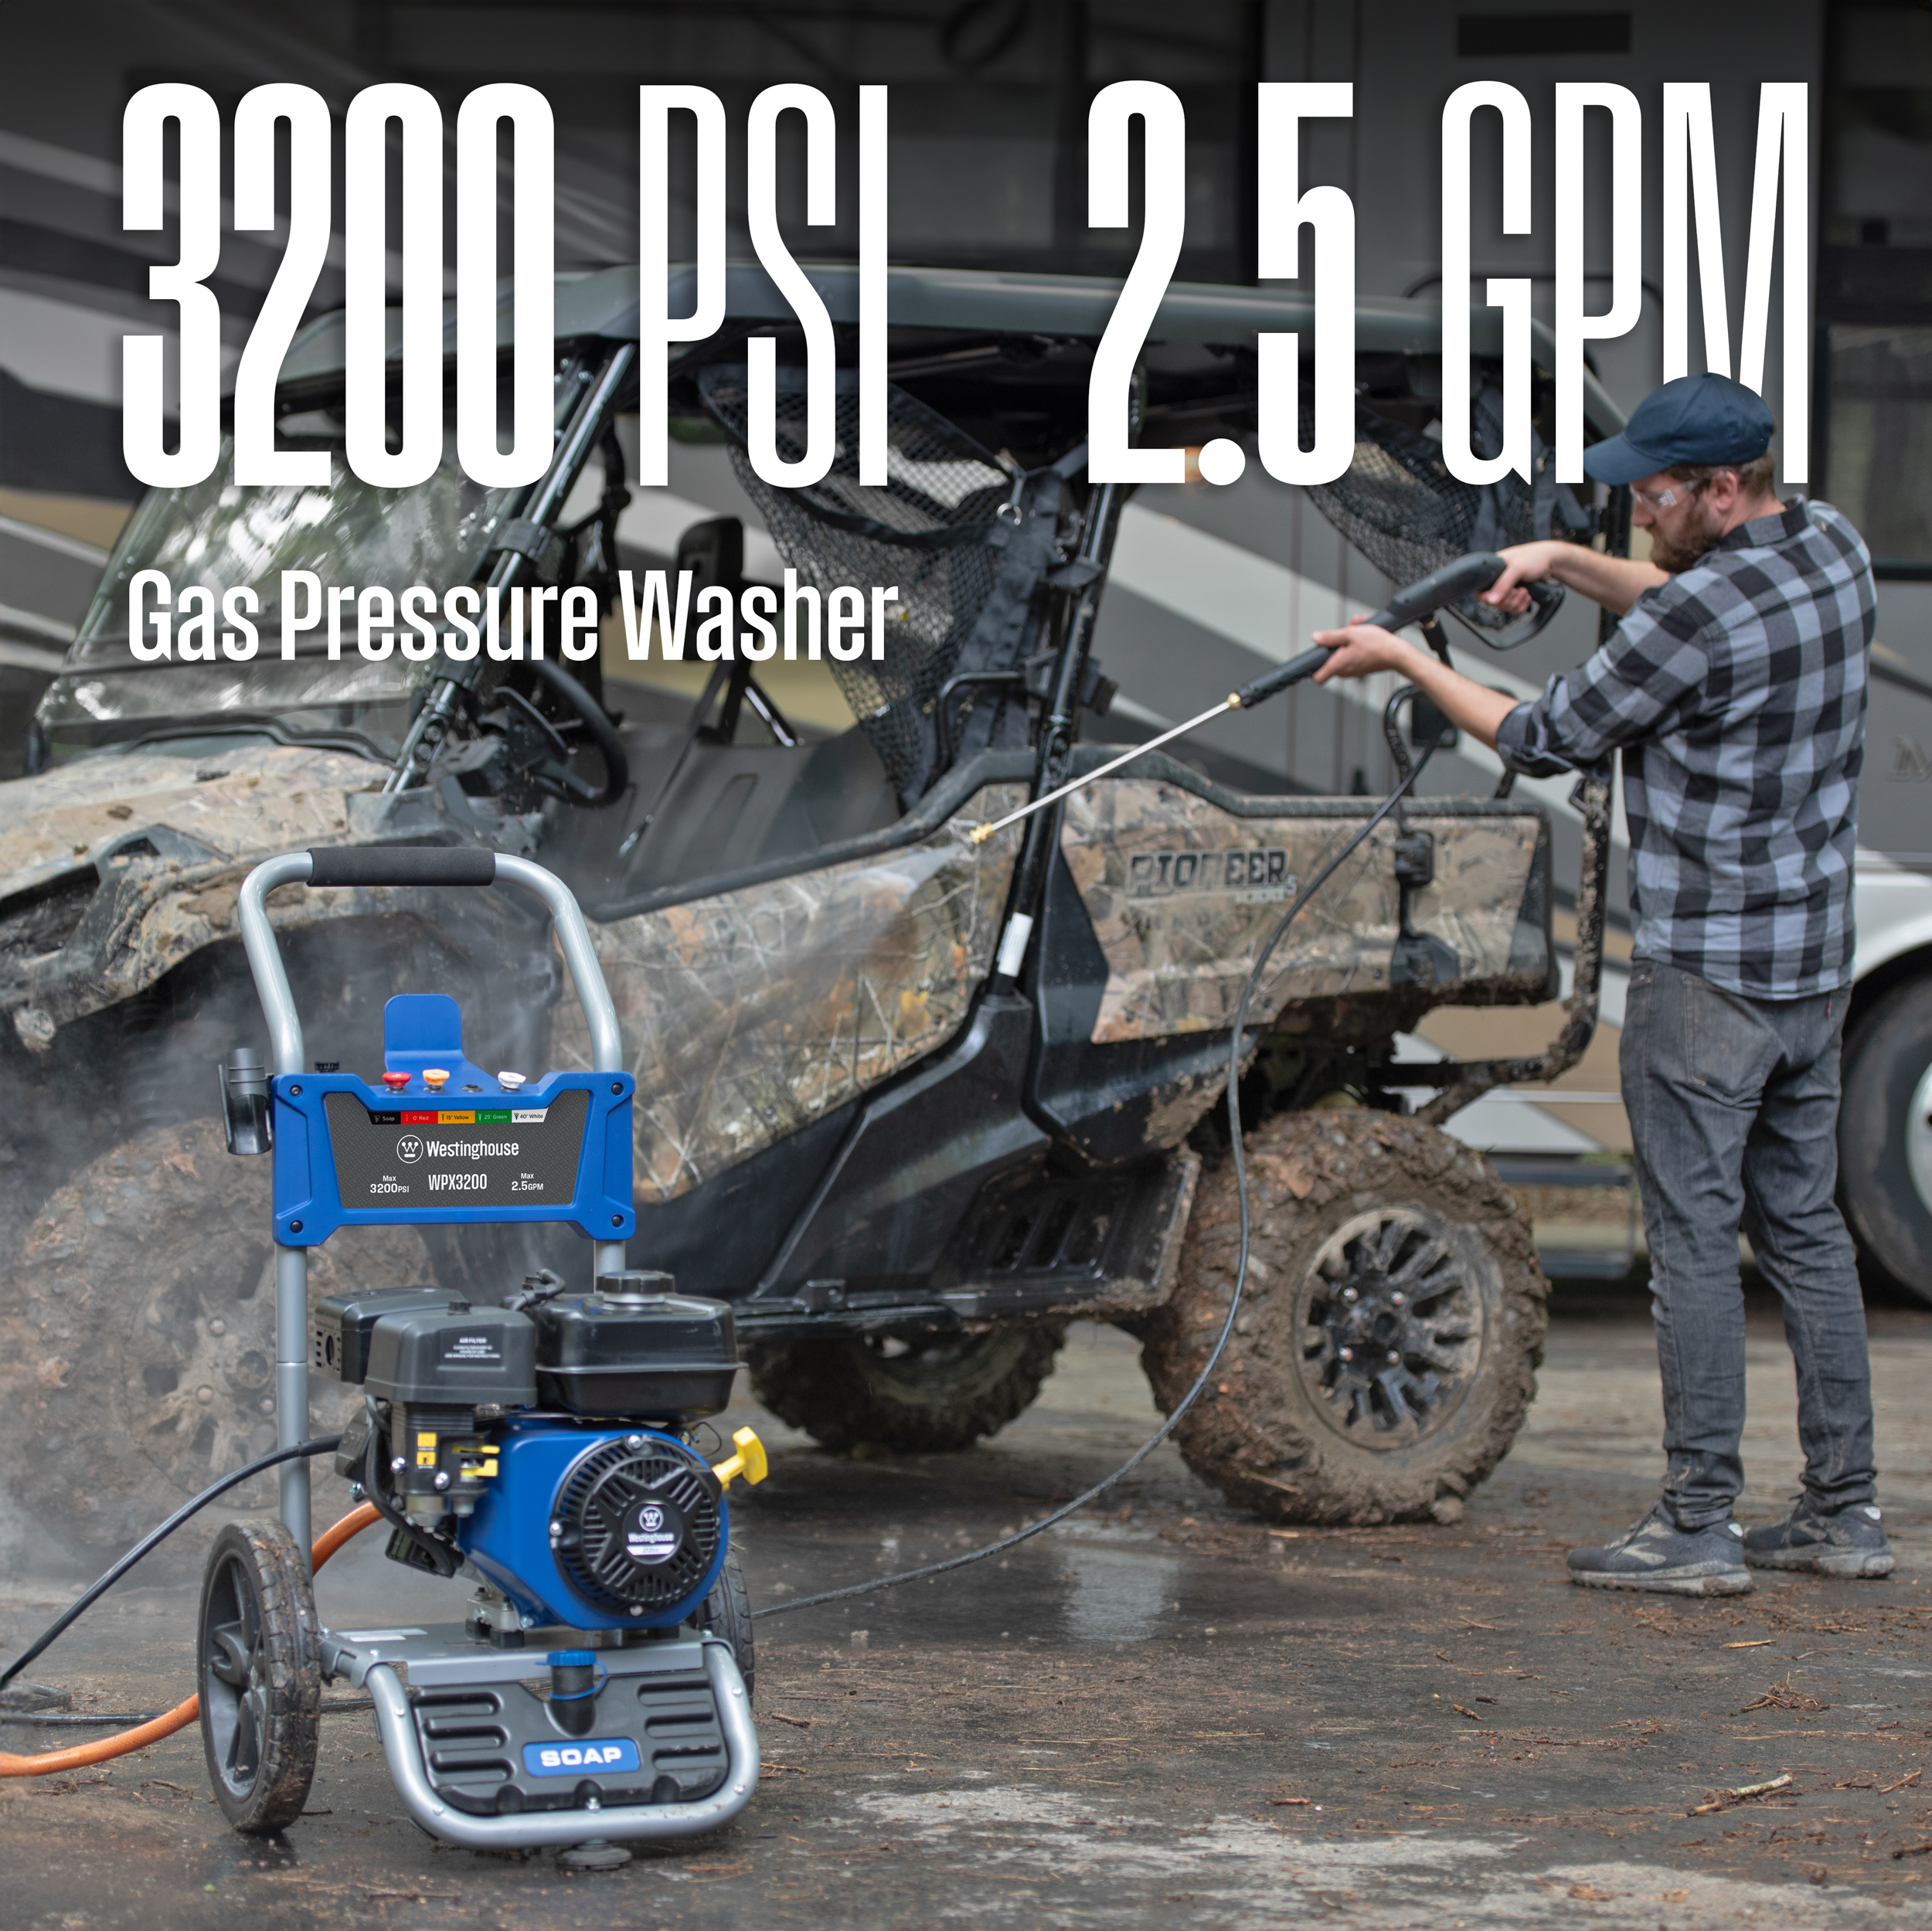 Westinghouse 3200-PSI, 2.5-GPM Gas Pressure Washer with 5 Nozzles & Soap Tank, 63 lbs. - image 2 of 13